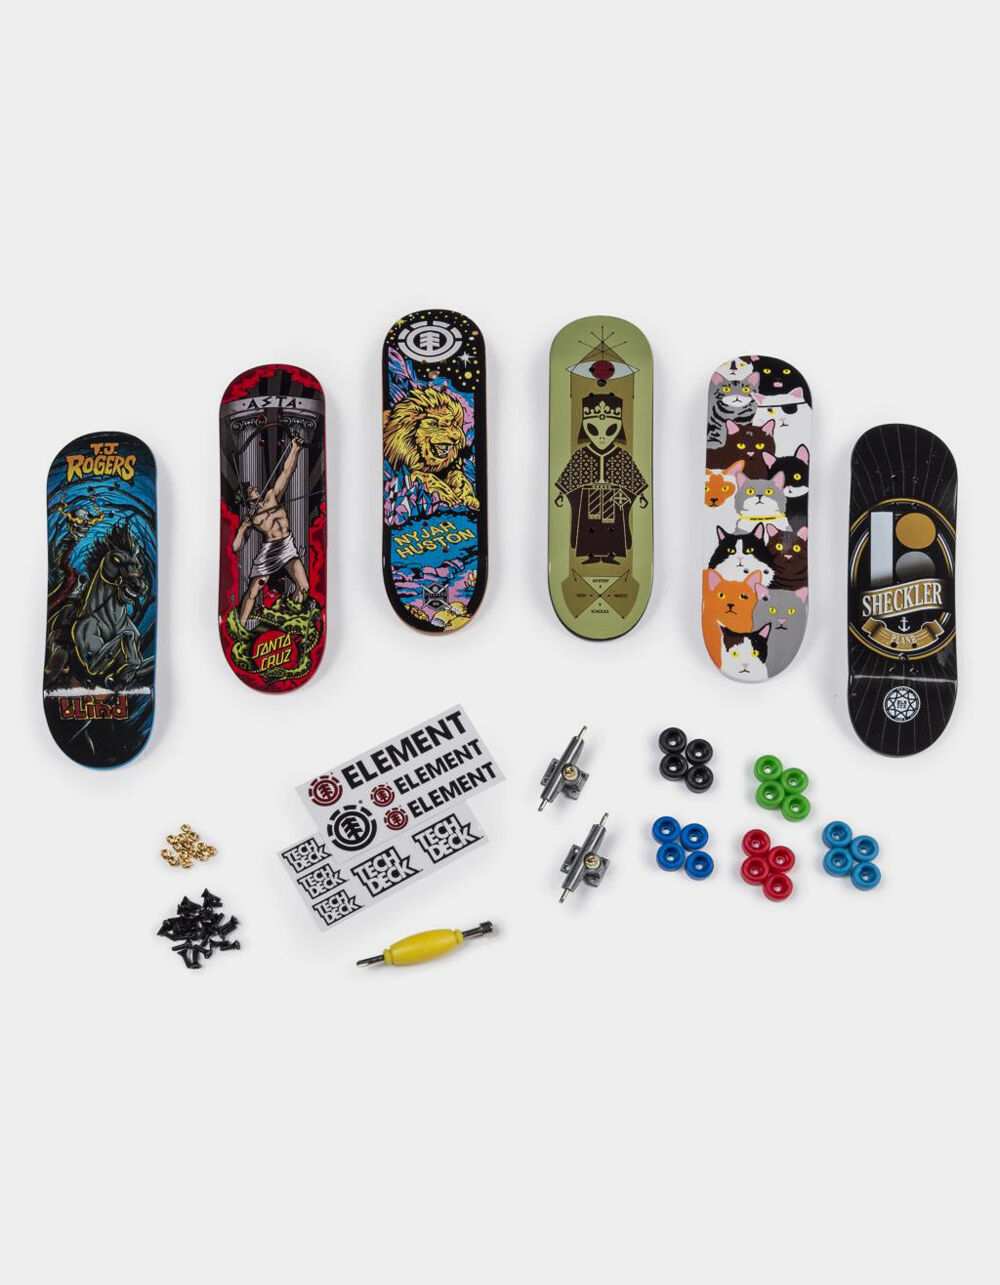 Whats the size of this Tech Deck  rFingerboards